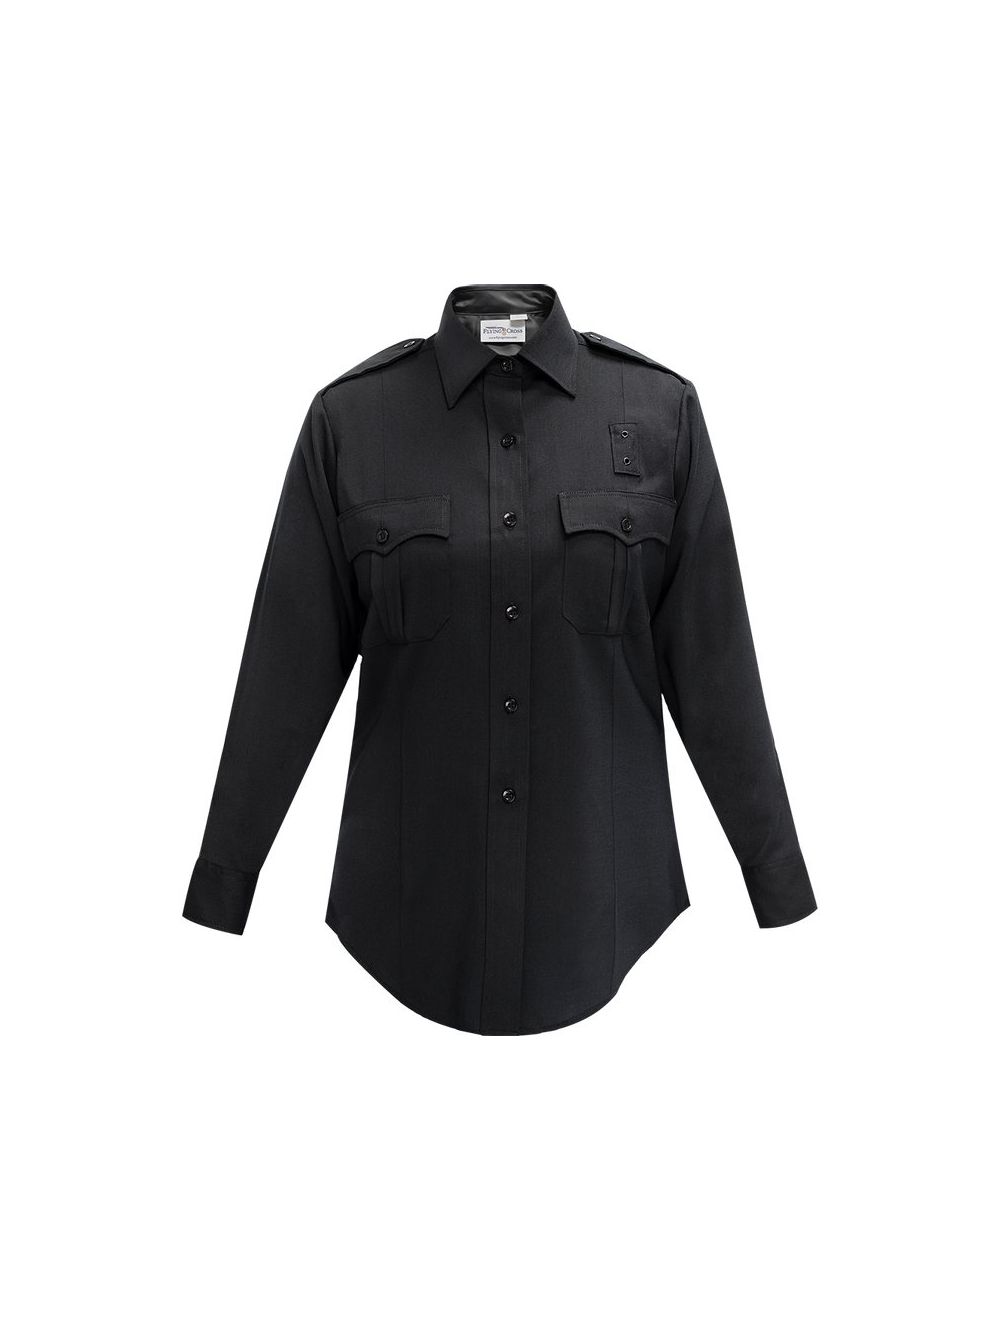 Flying Cross Justice Women's Poly/Wool Long Sleeve Uniform Shirt - LAPD Navy 107W84 - Newest Products